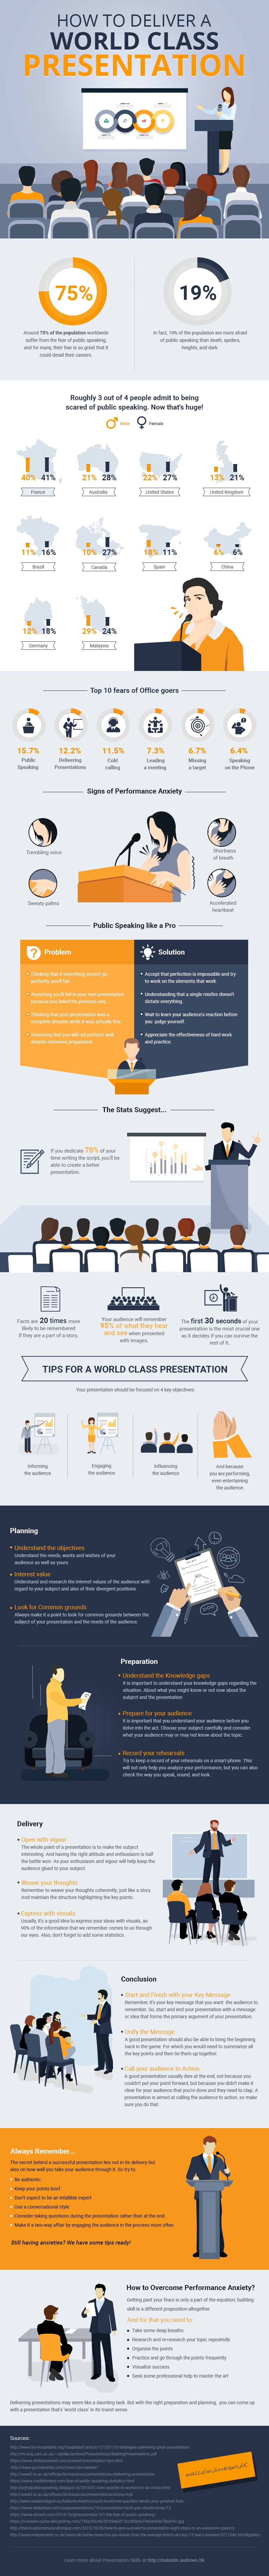 How to Deliver a World Class Presentation Infographic